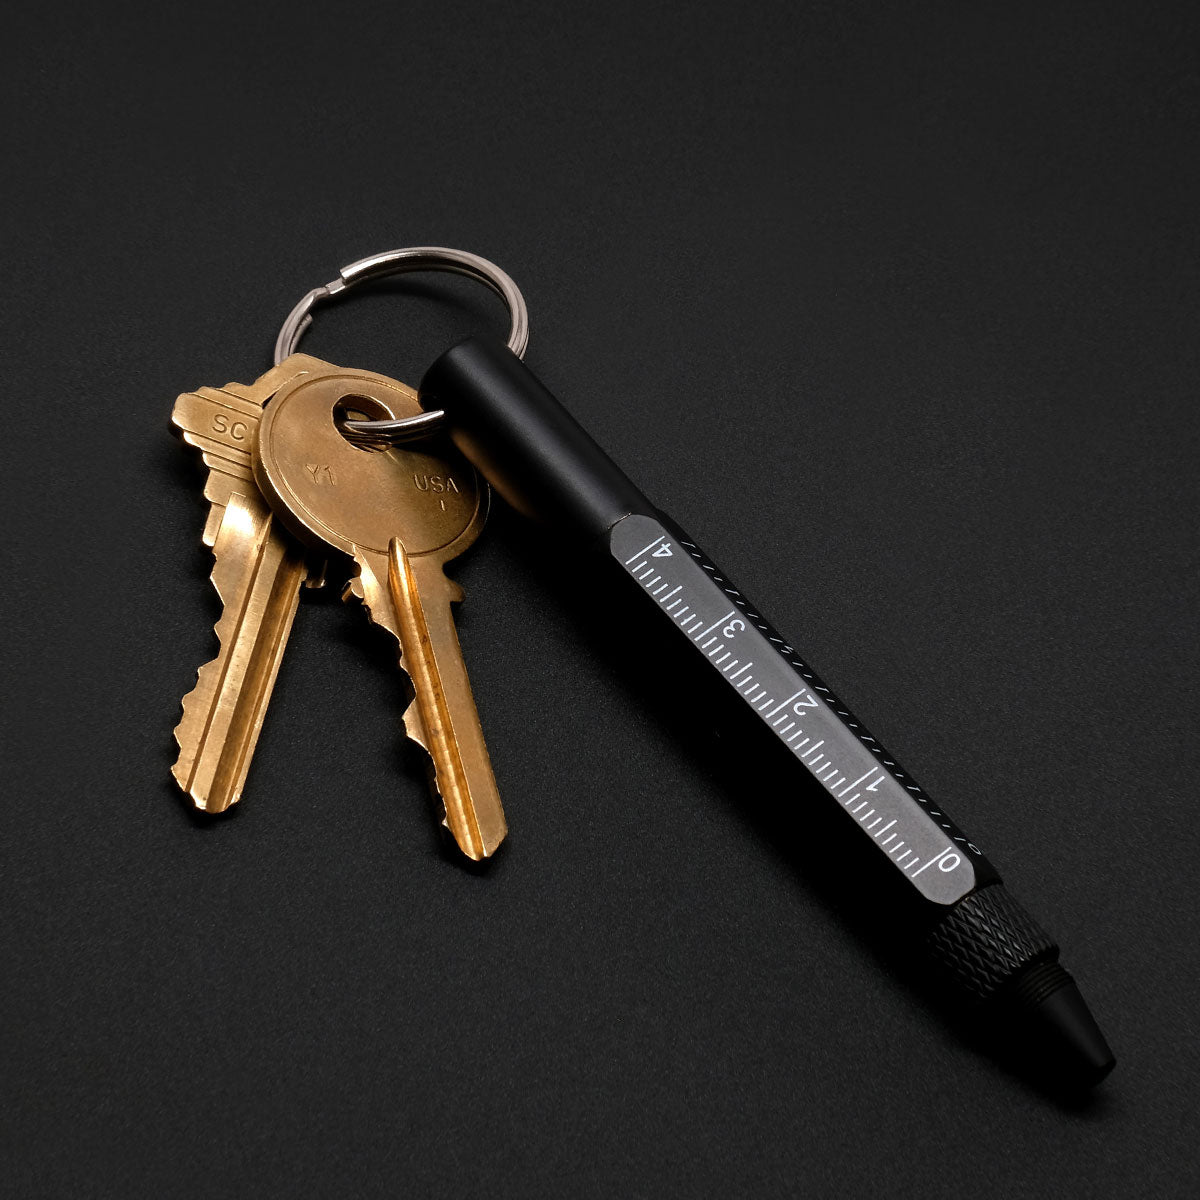 1 PieceTitanium Keychain Pen Carry-on Compact Outdoor Tool Pen